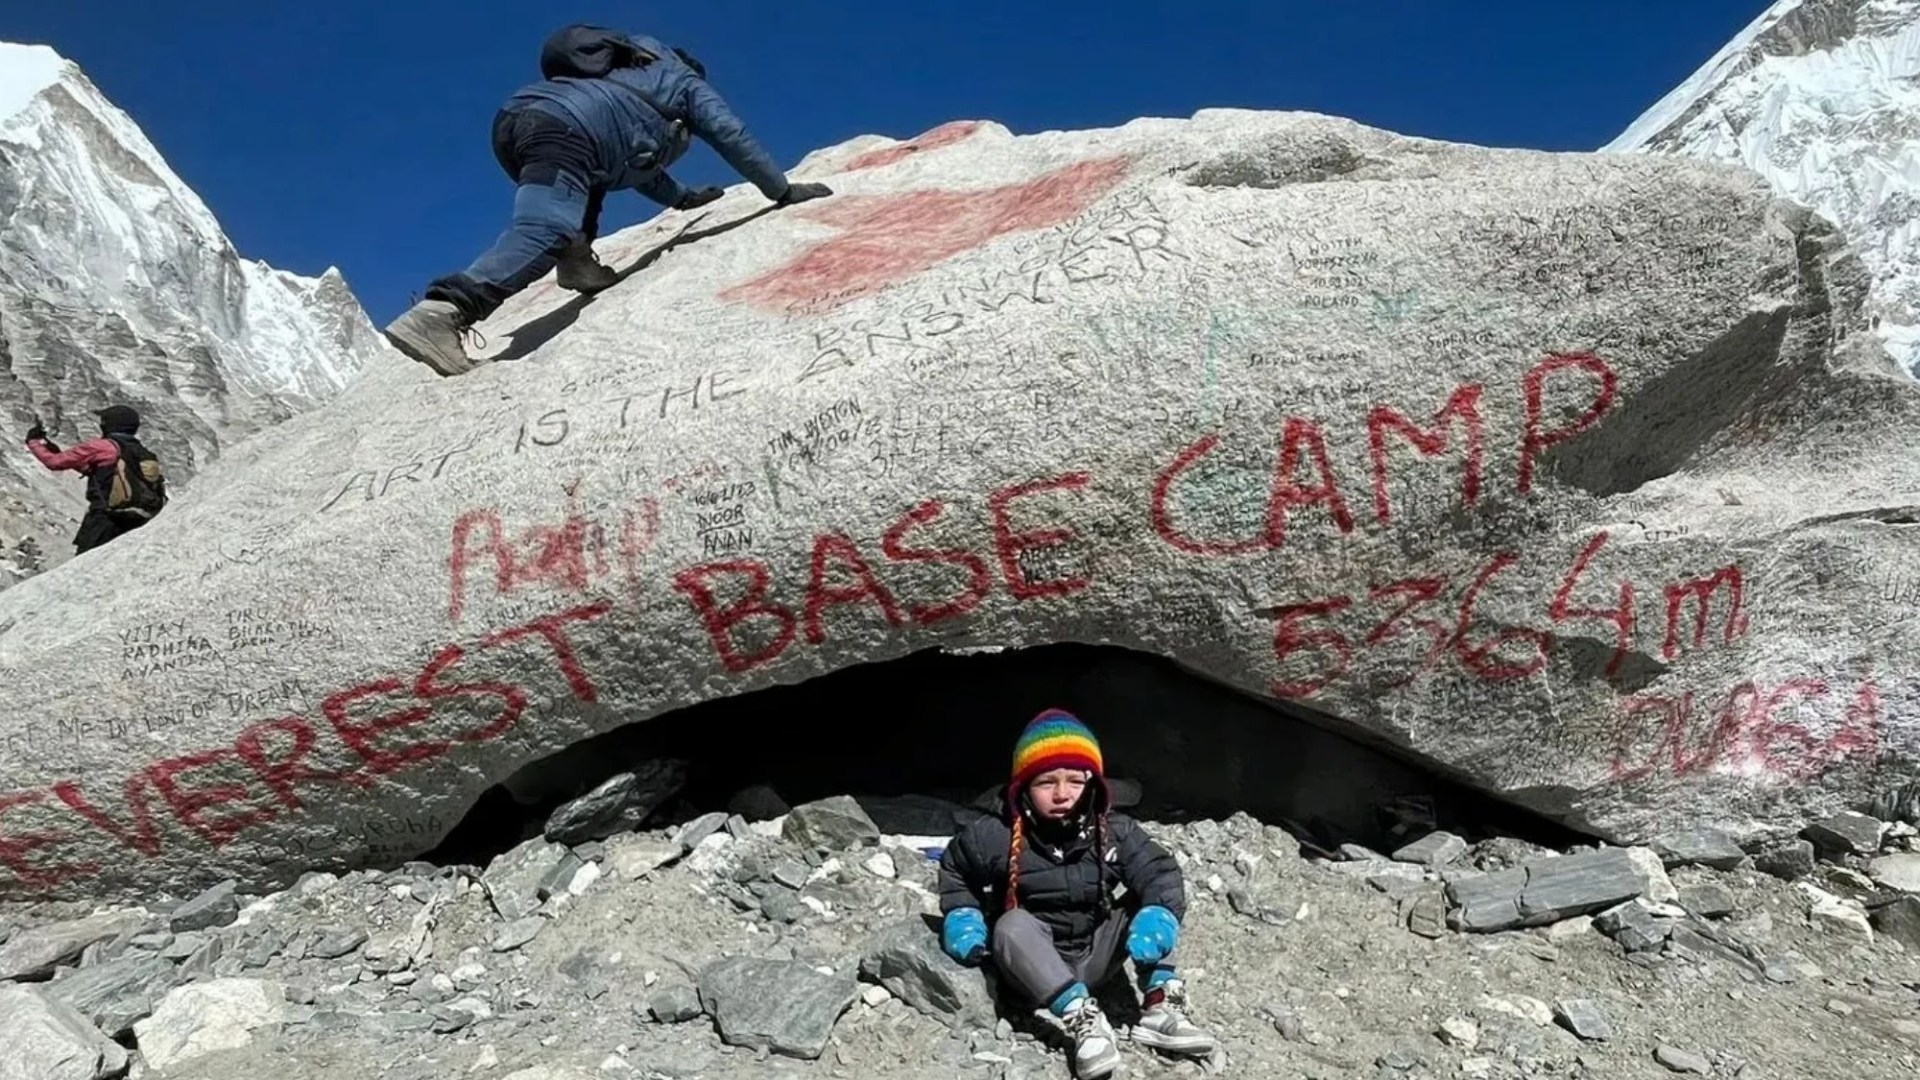 Intrepid Brit boy, 2, 'turns into youngest particular person to achieve Everest base camp'